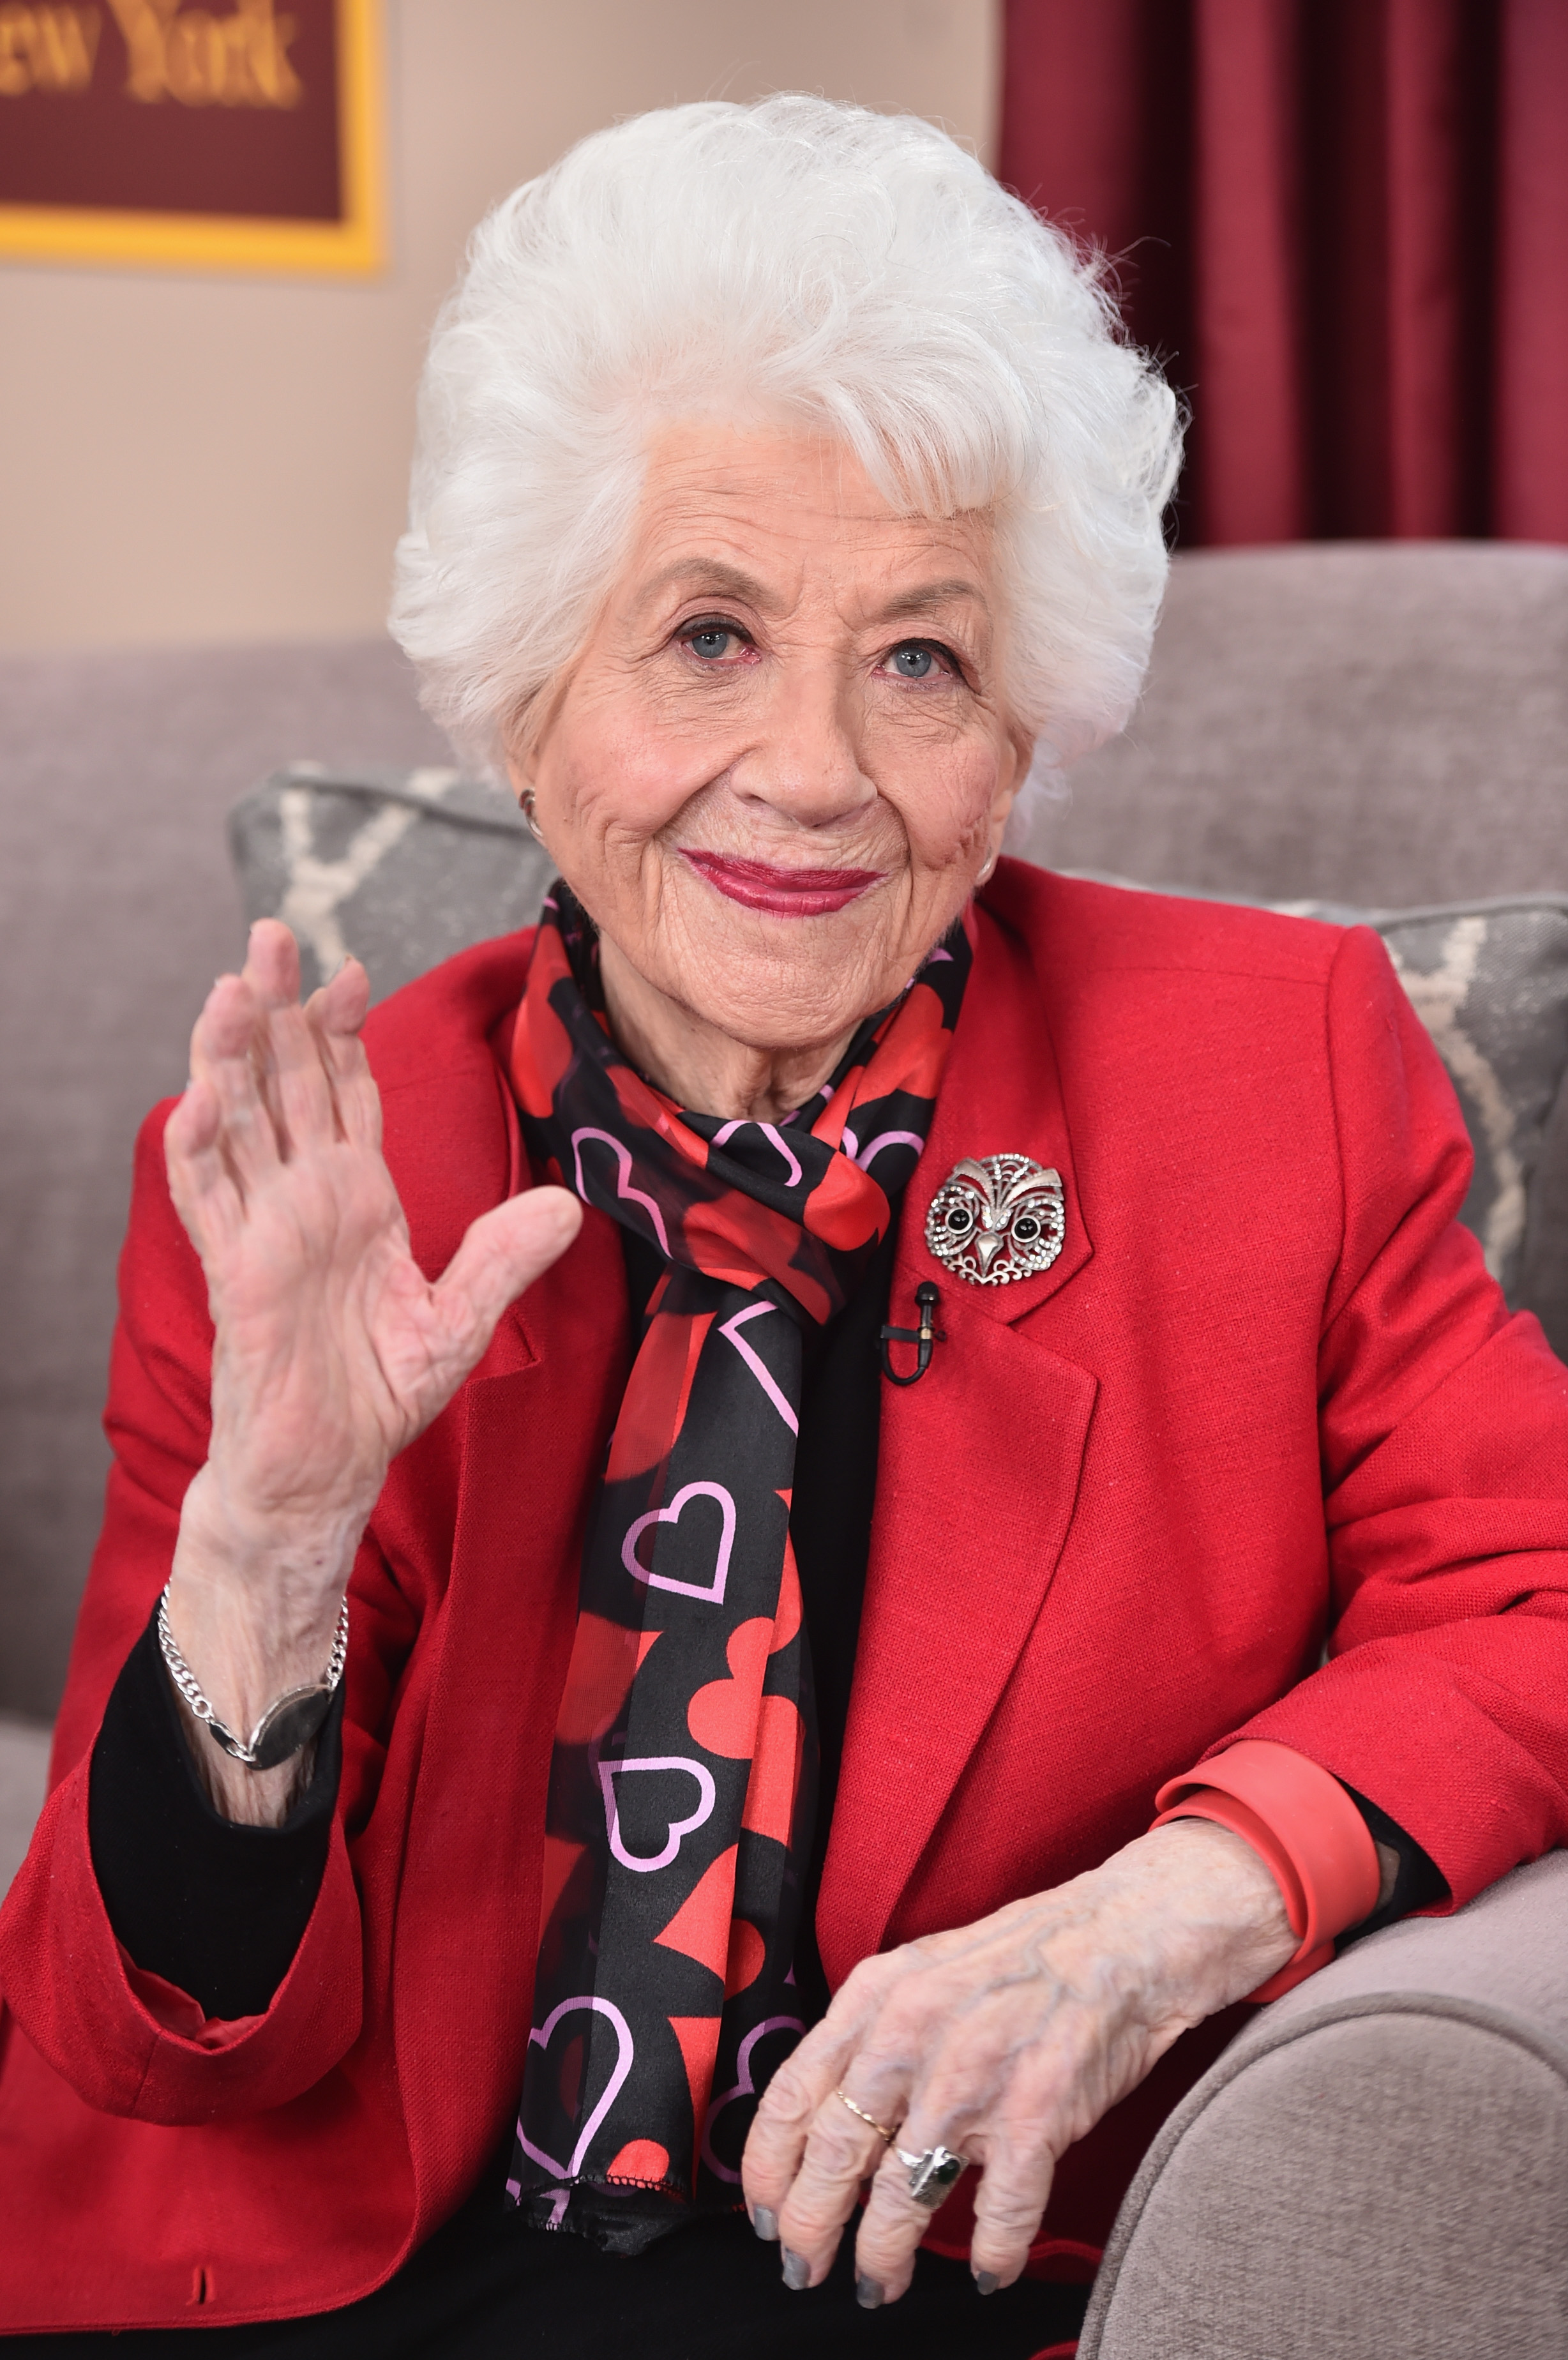 Charlotte Rae attends Hallmark's Home and Family "Facts Of Life Reunion" at Universal Studios Backlot on February 12, 2016 in Universal City, California. | Source: Getty Images